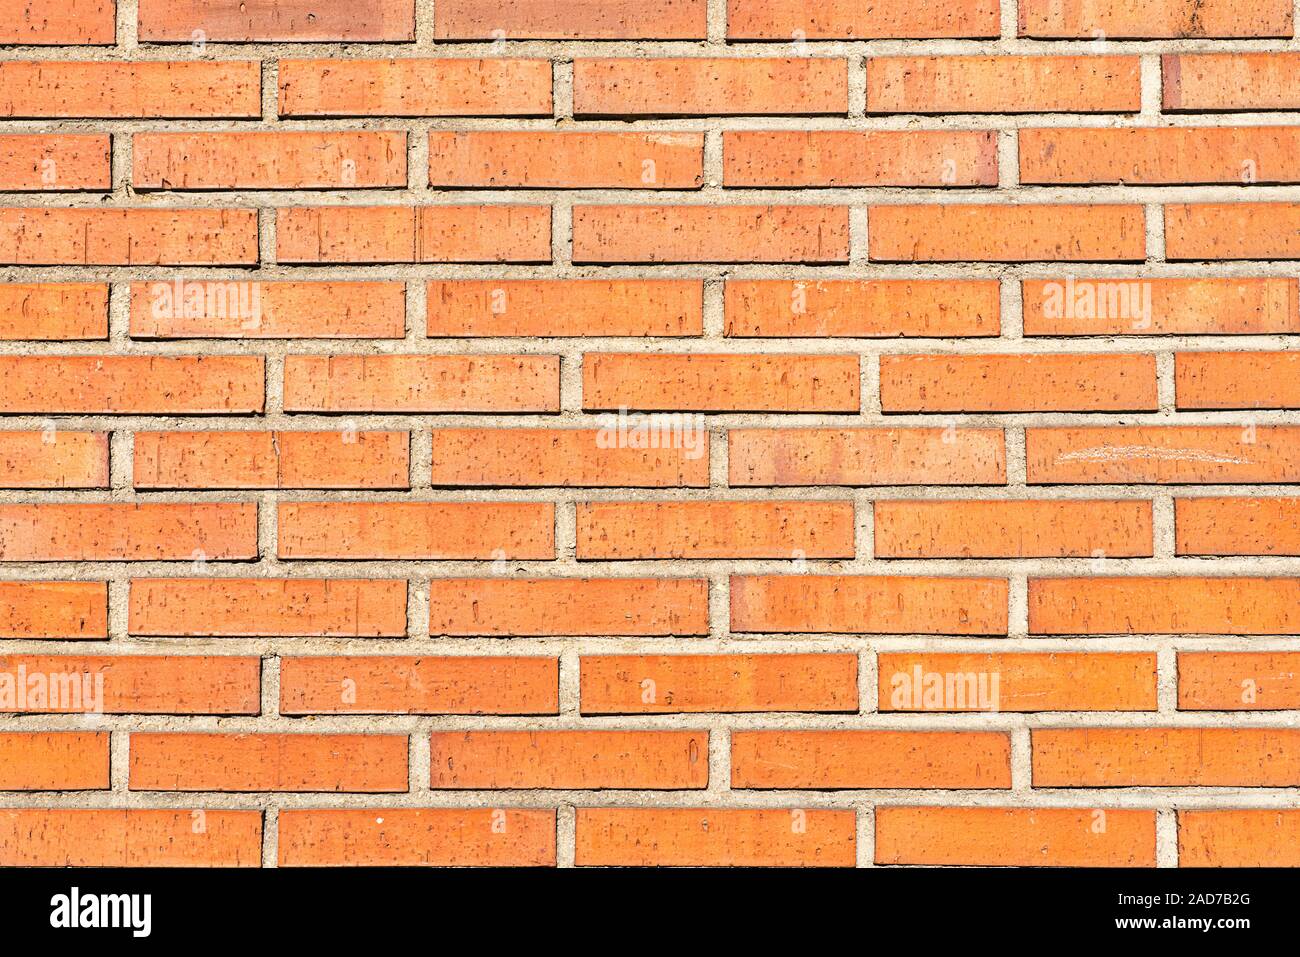 Background from an orange brickwall Stock Photo